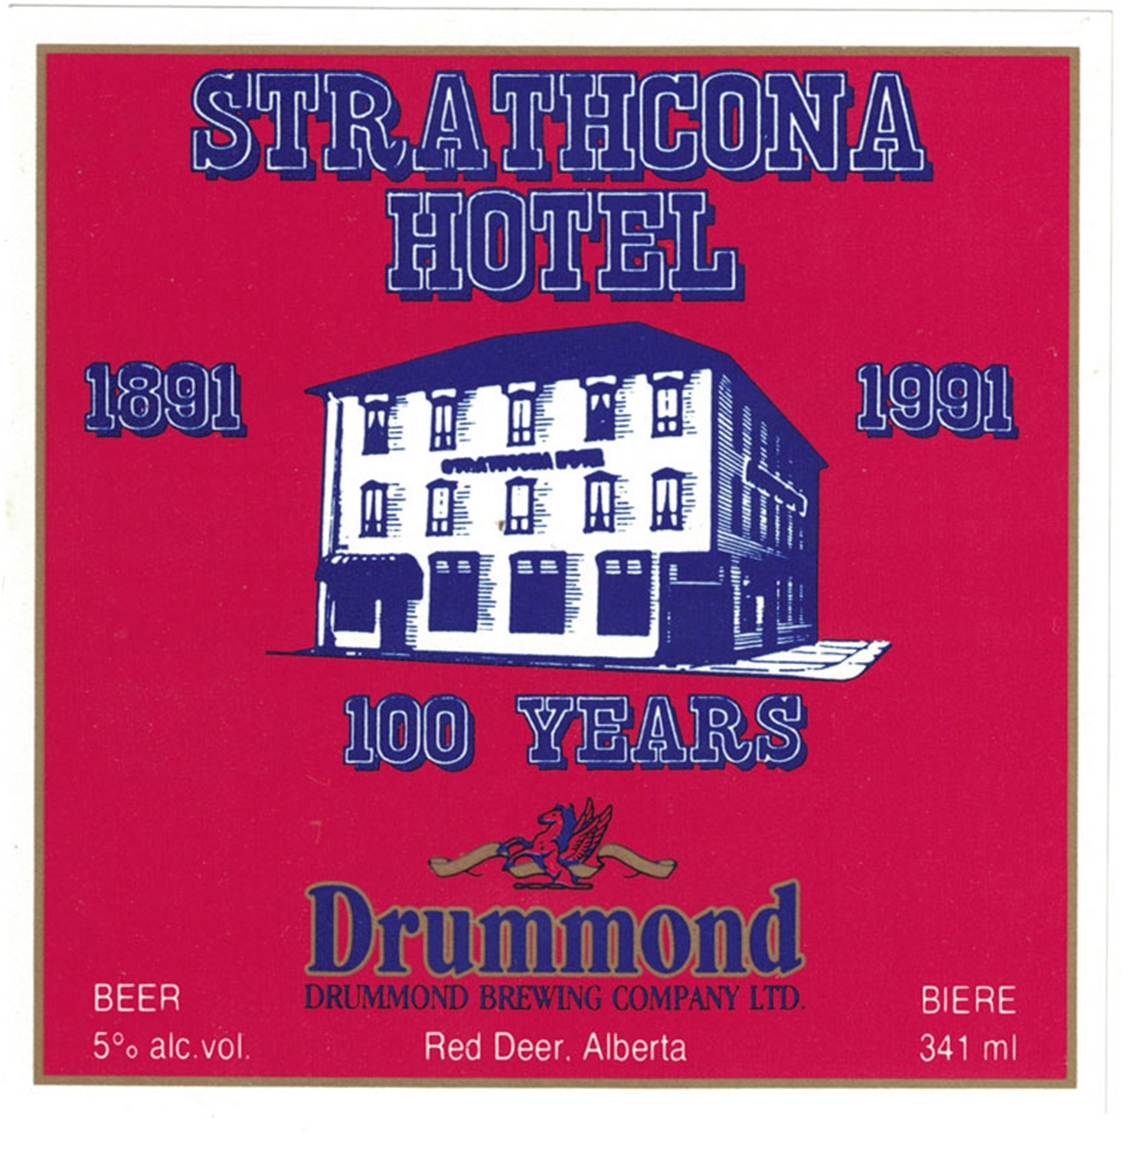 Strathcona Hotel 100 Years Beer Biere Label